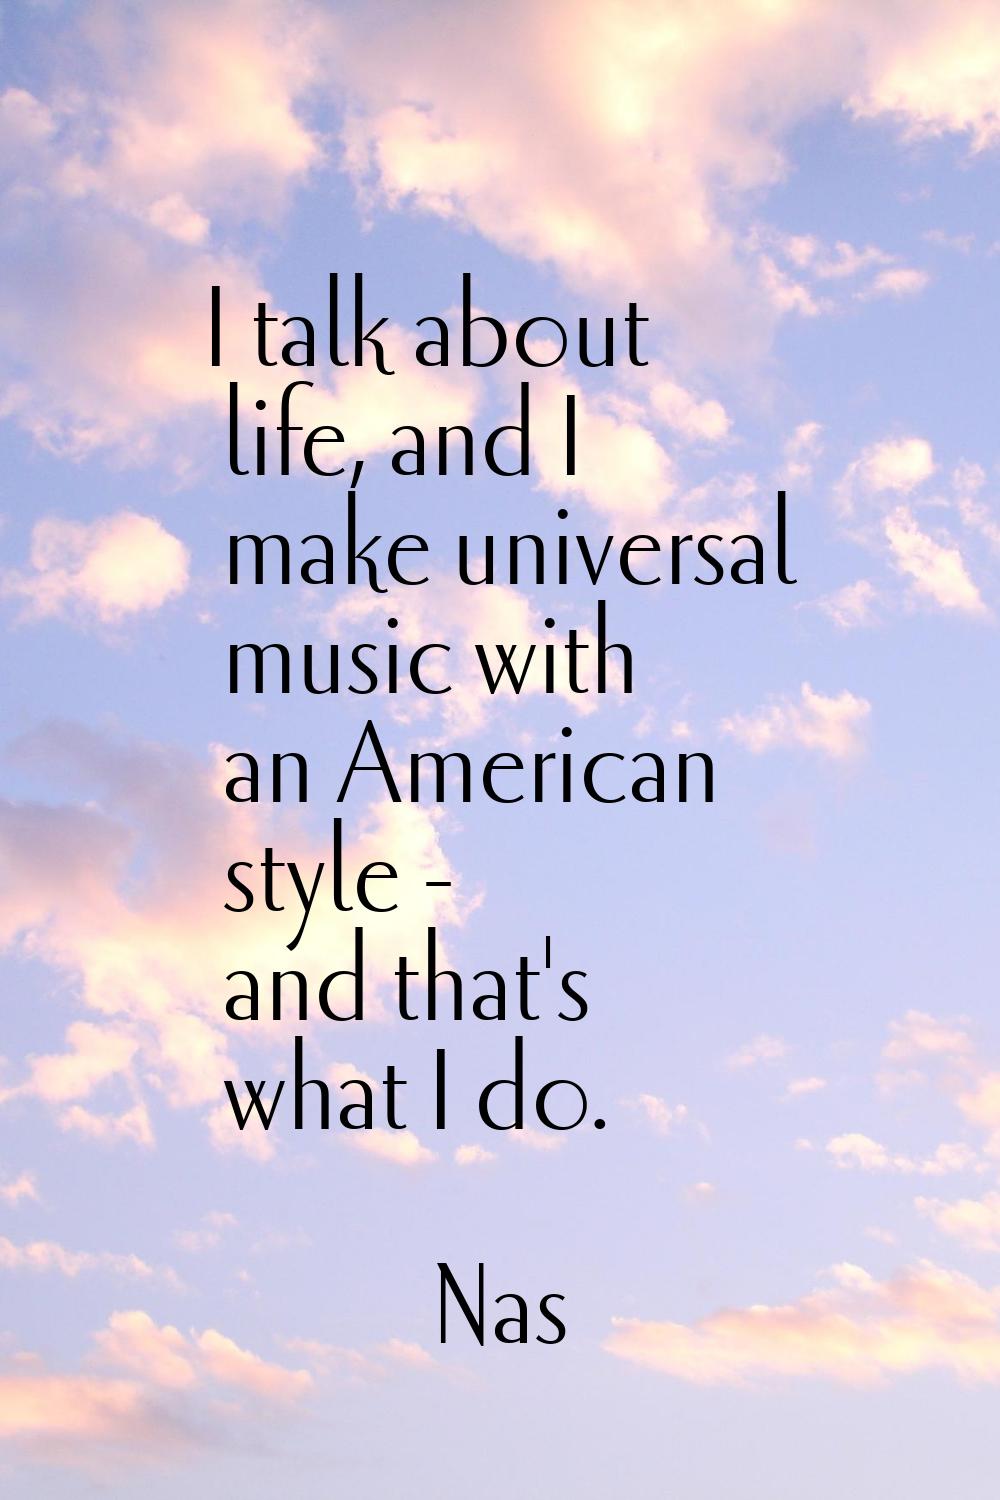 I talk about life, and I make universal music with an American style - and that's what I do.